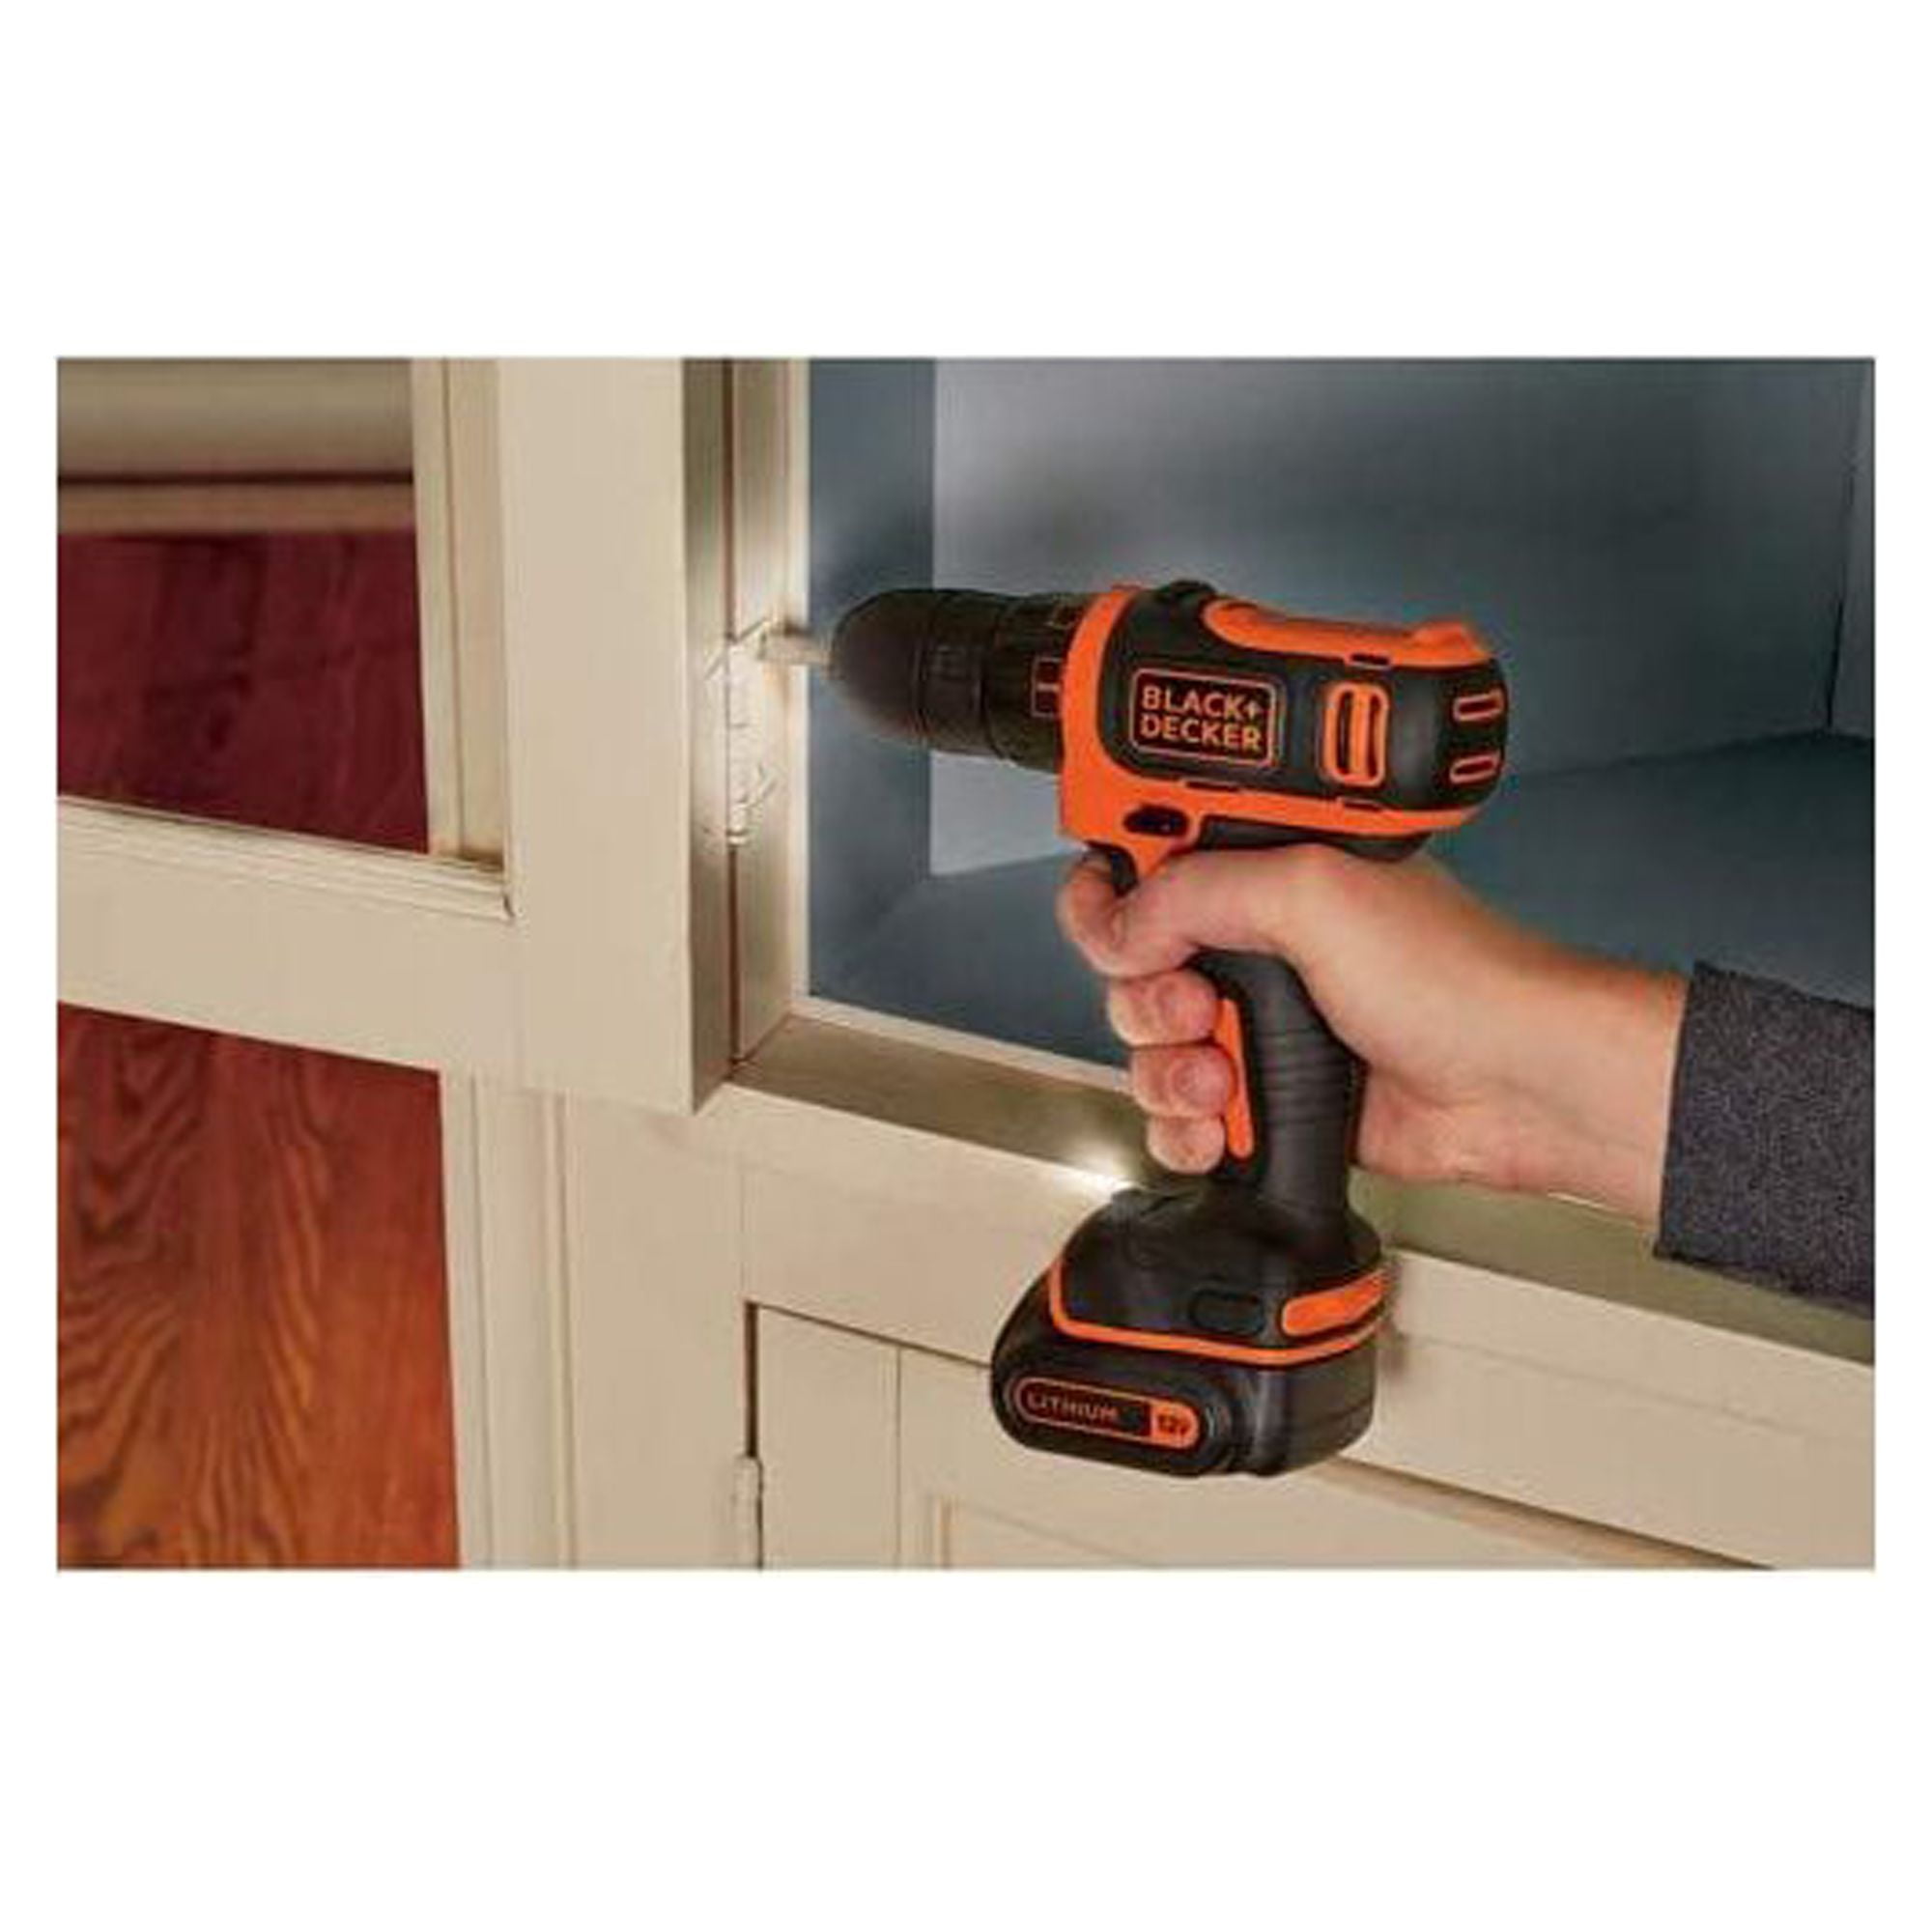 BLACK+DECKER BCPK1249C 12V MAX Dill and 42 piece Home Project Kit